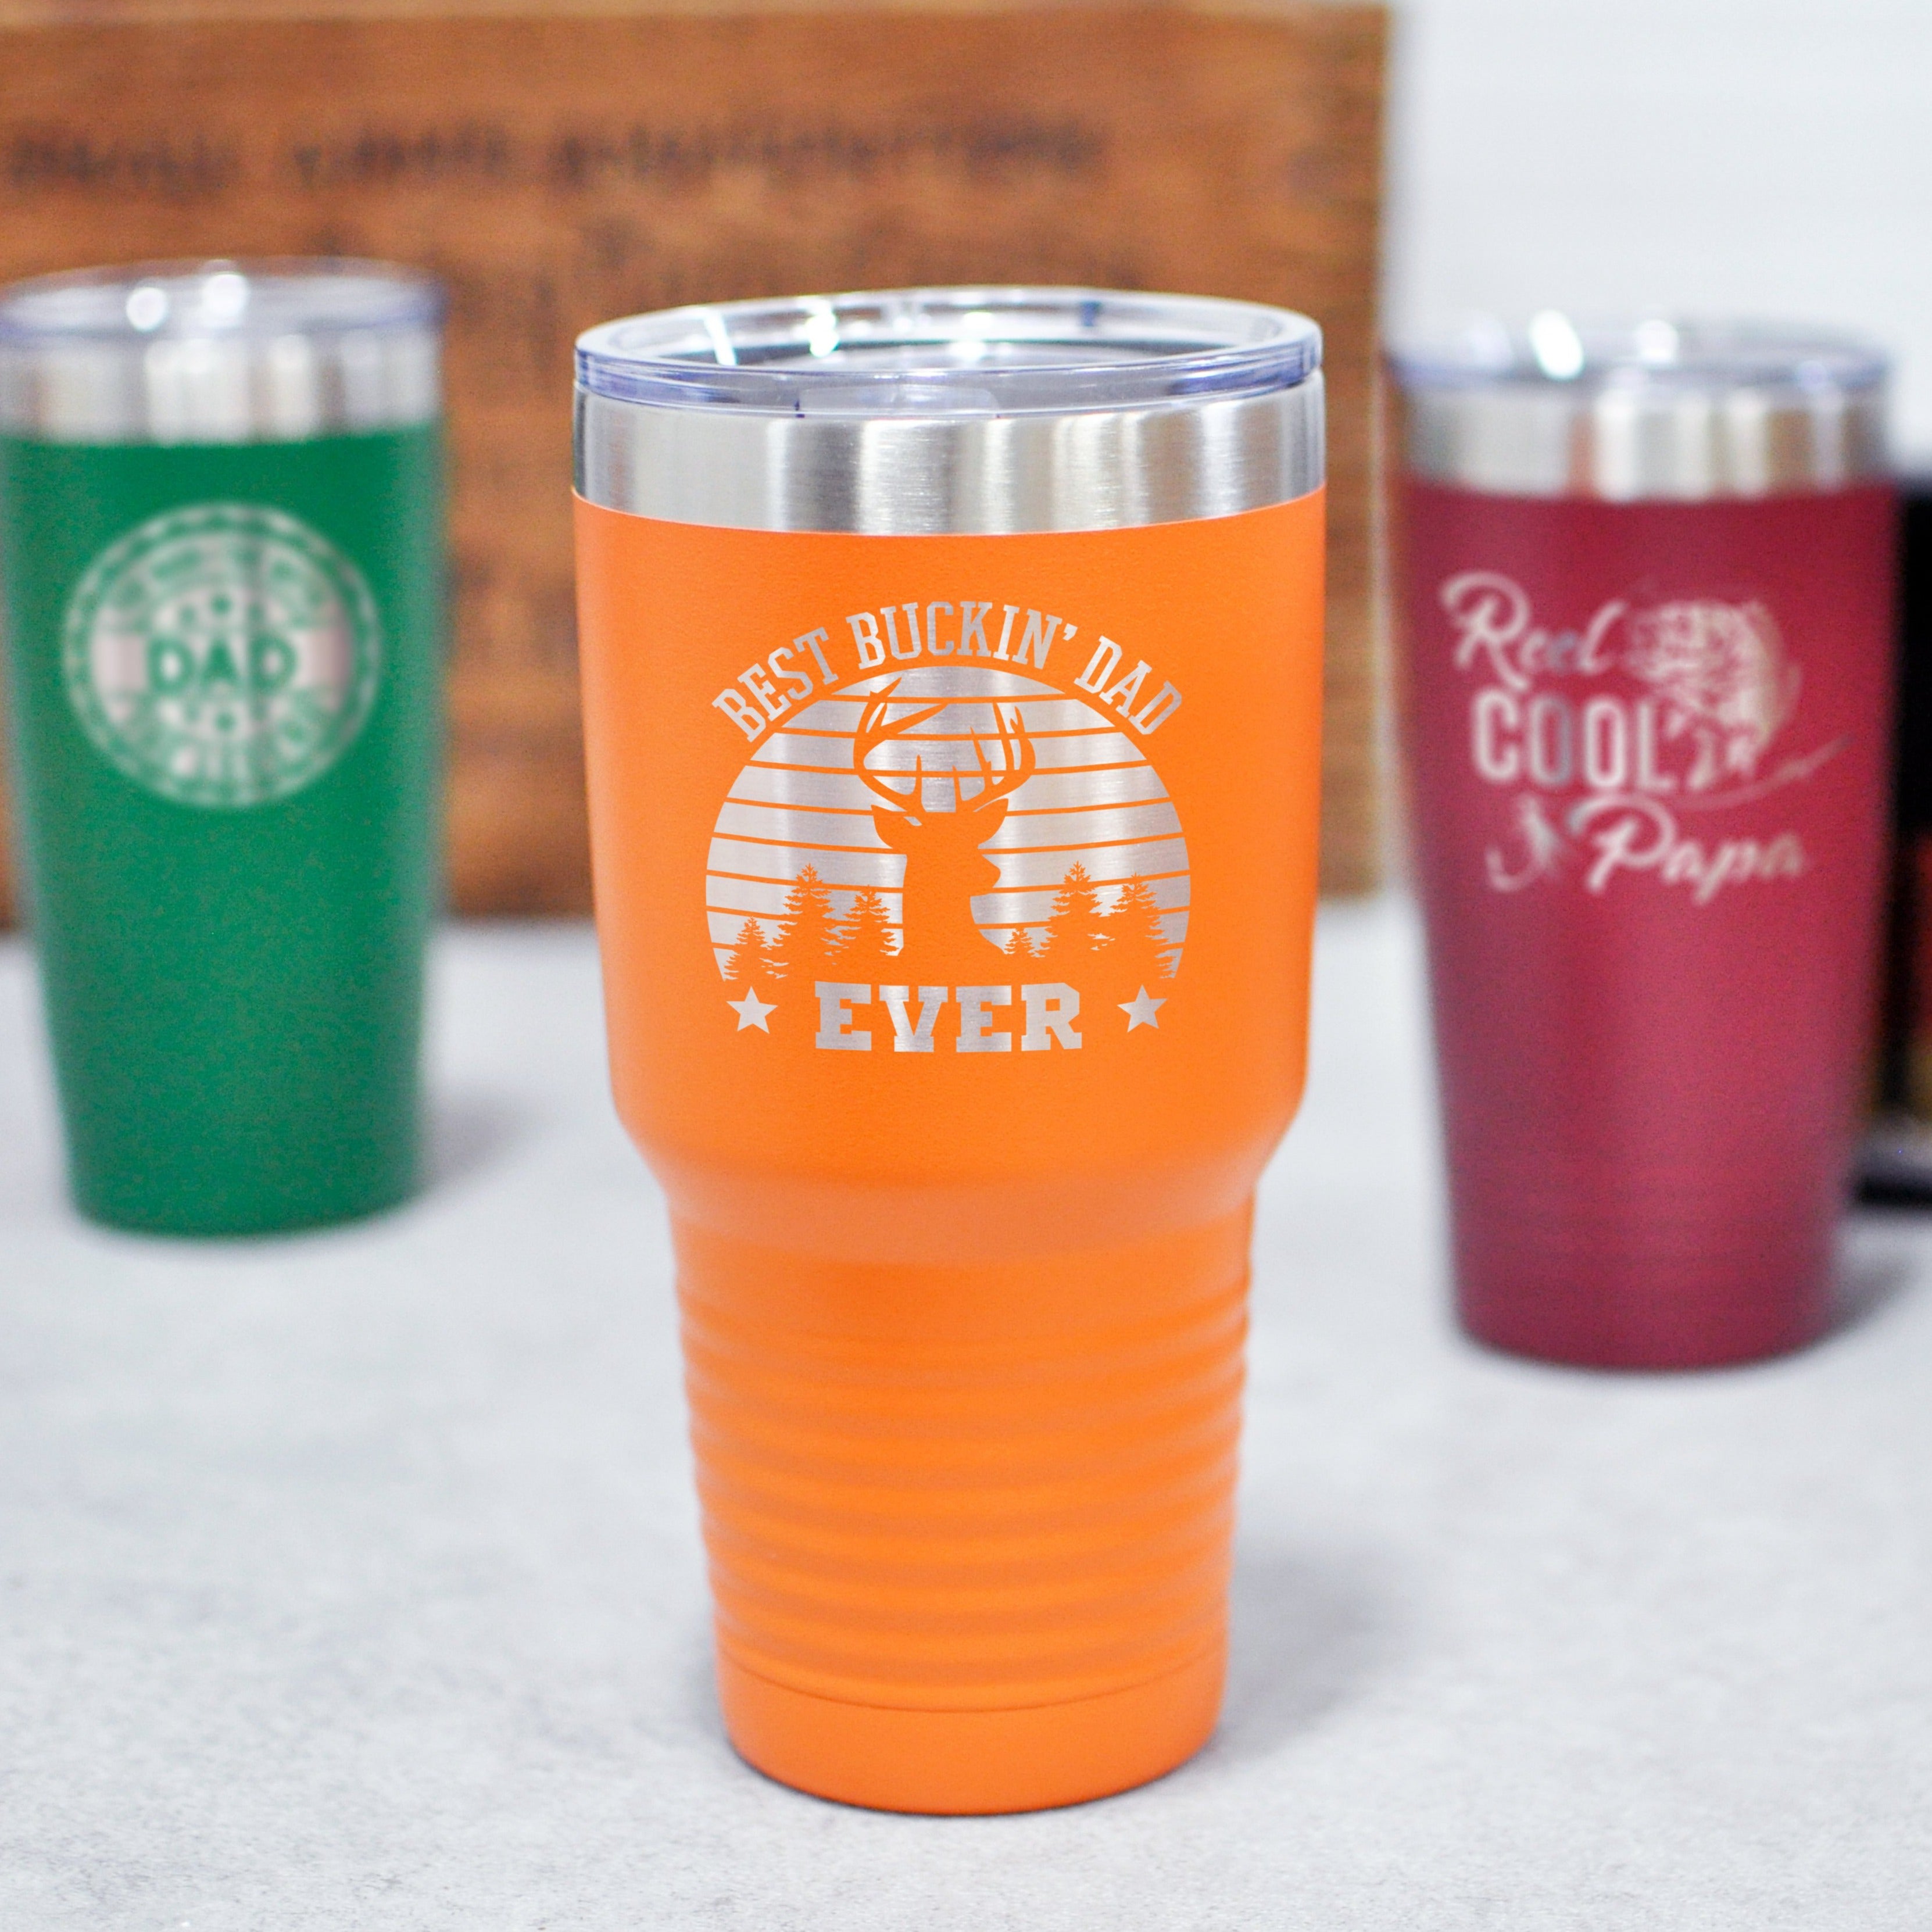 Personalized Tumbler for Dad, Father, Grandpa, Husband, Funny